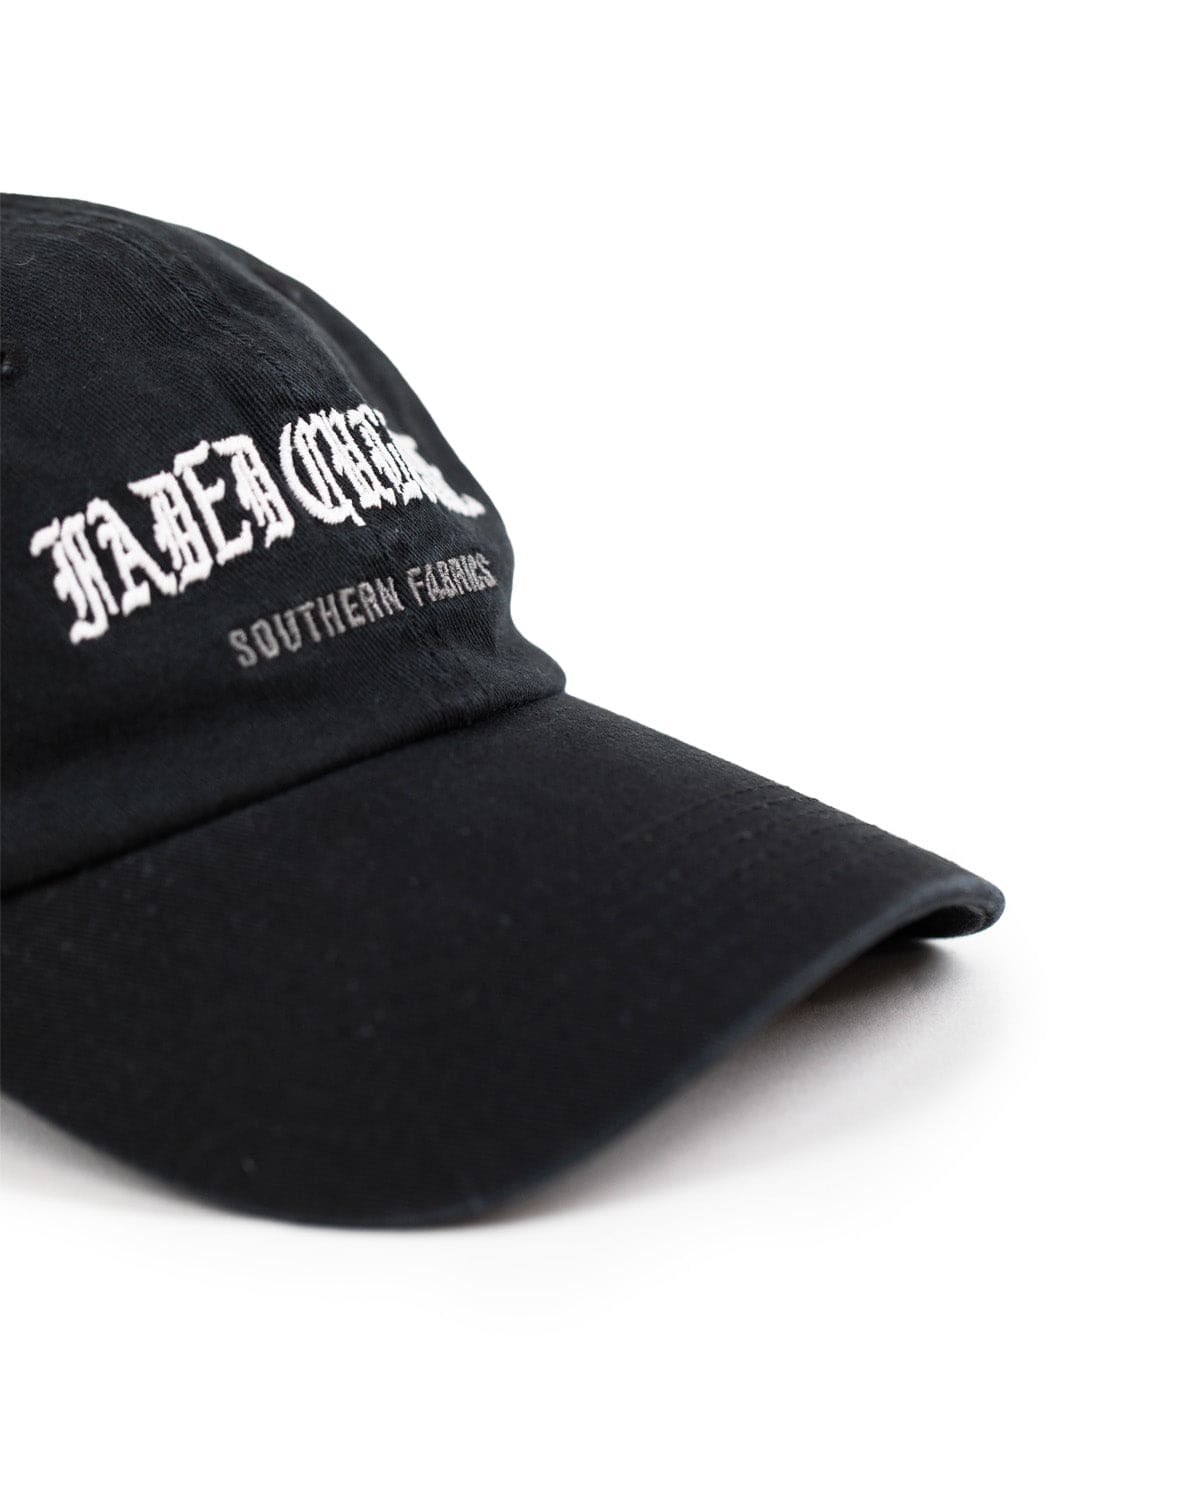 Black FC Southern Fabrics embroidered dad hat